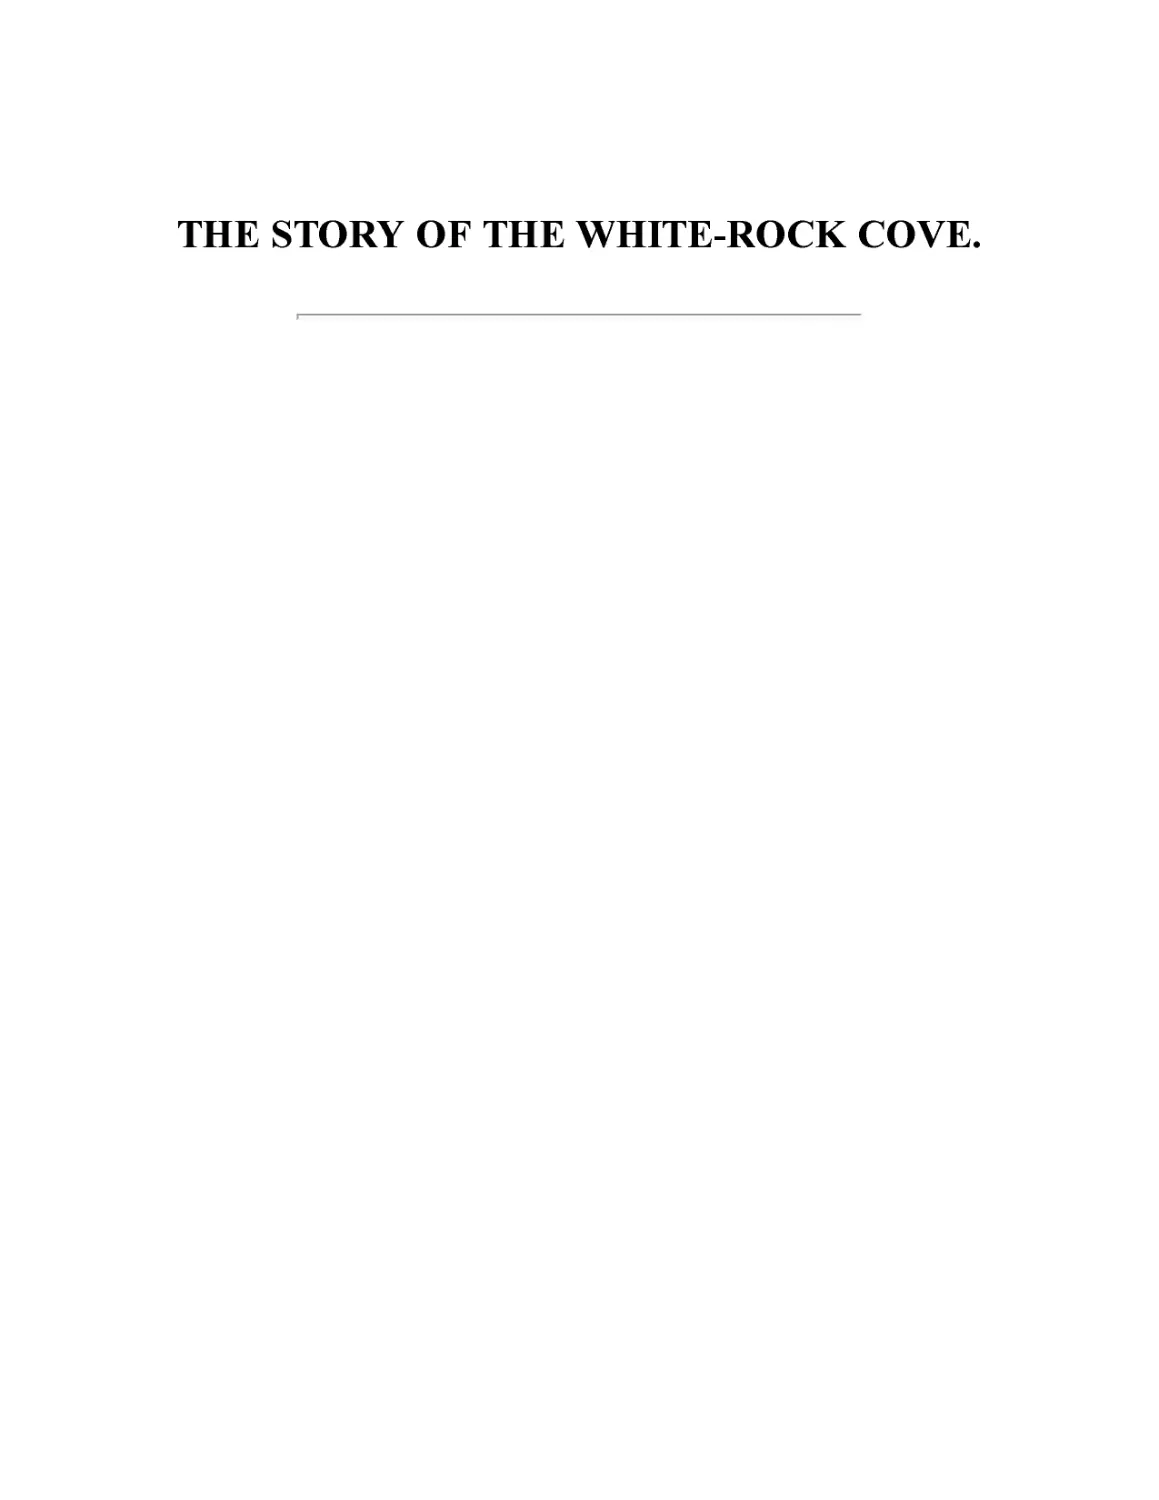 ﻿THE STORY OF THE WHITE-ROCK COVE